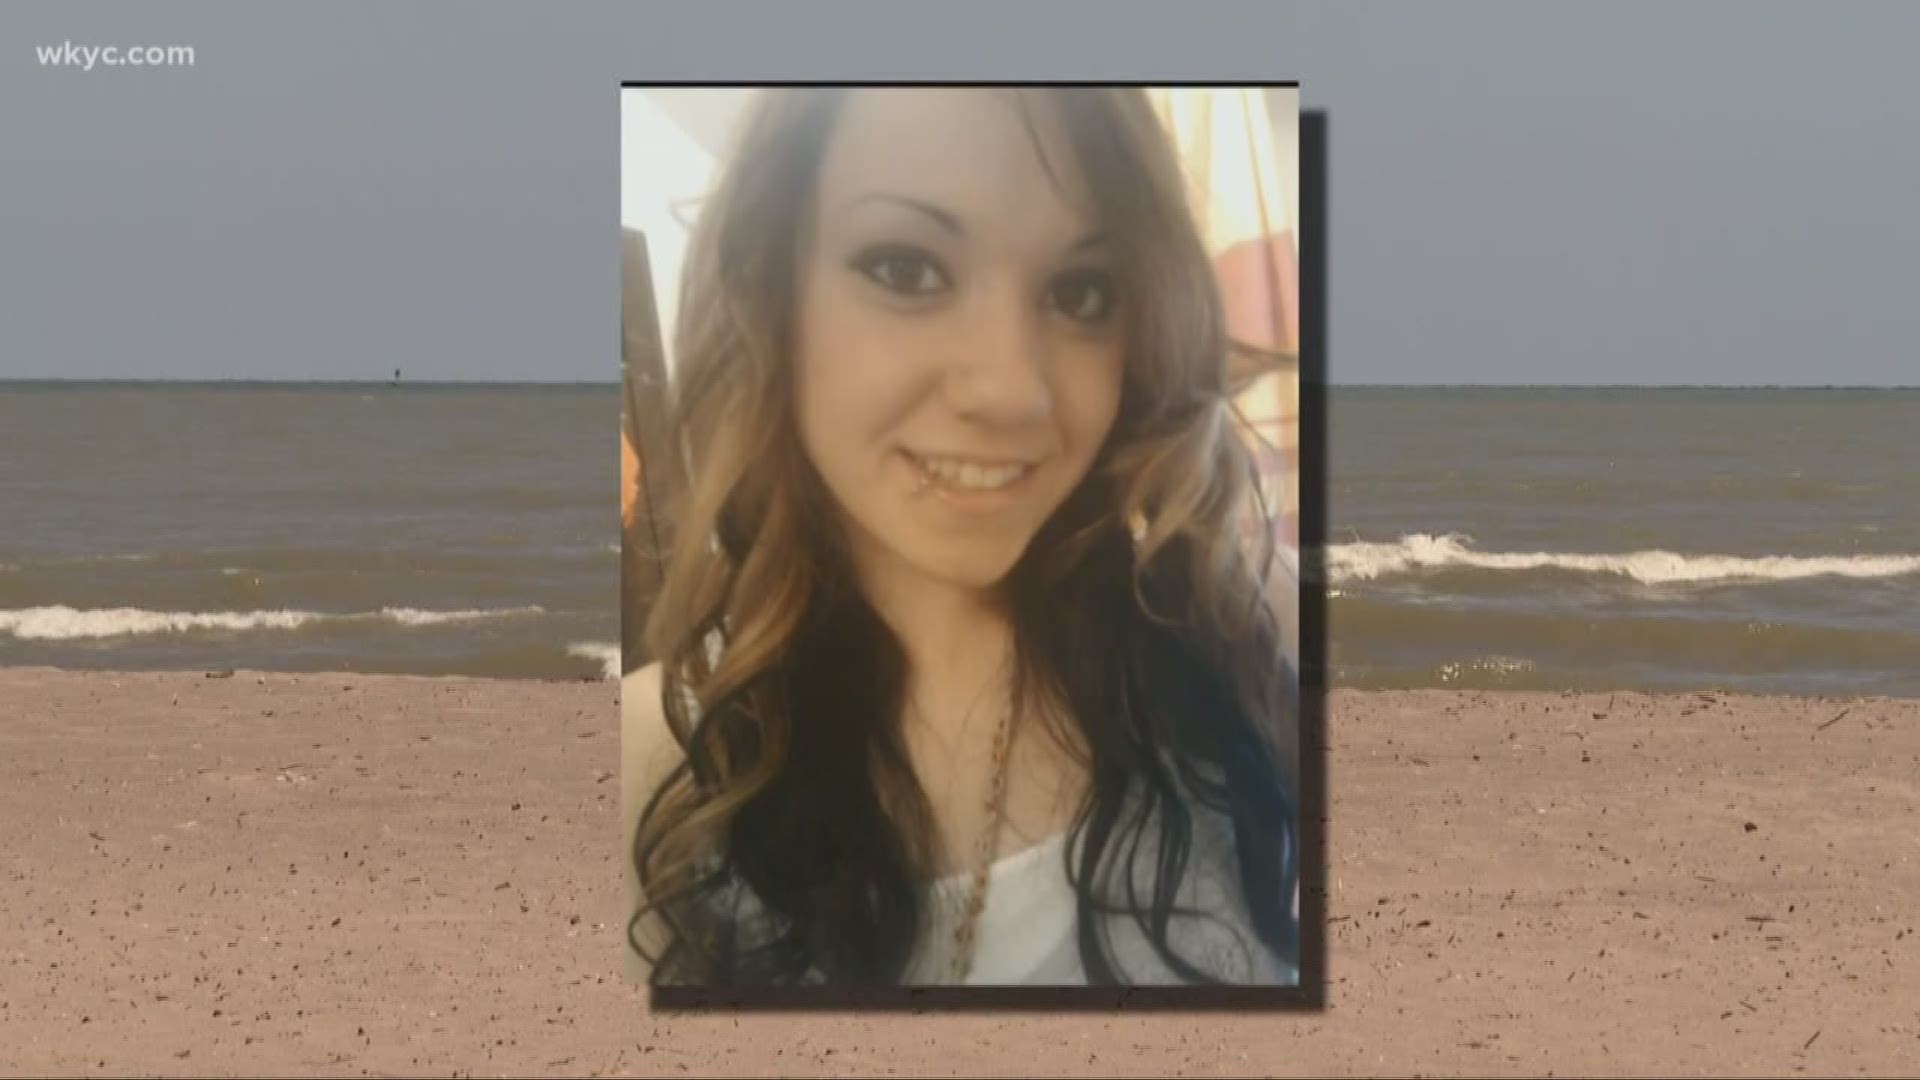 Family members of 29-year-old Brittany Young want Huron City officials to add safety measures at Nickel Plate Beach after Young went missing while swimming Sunday.